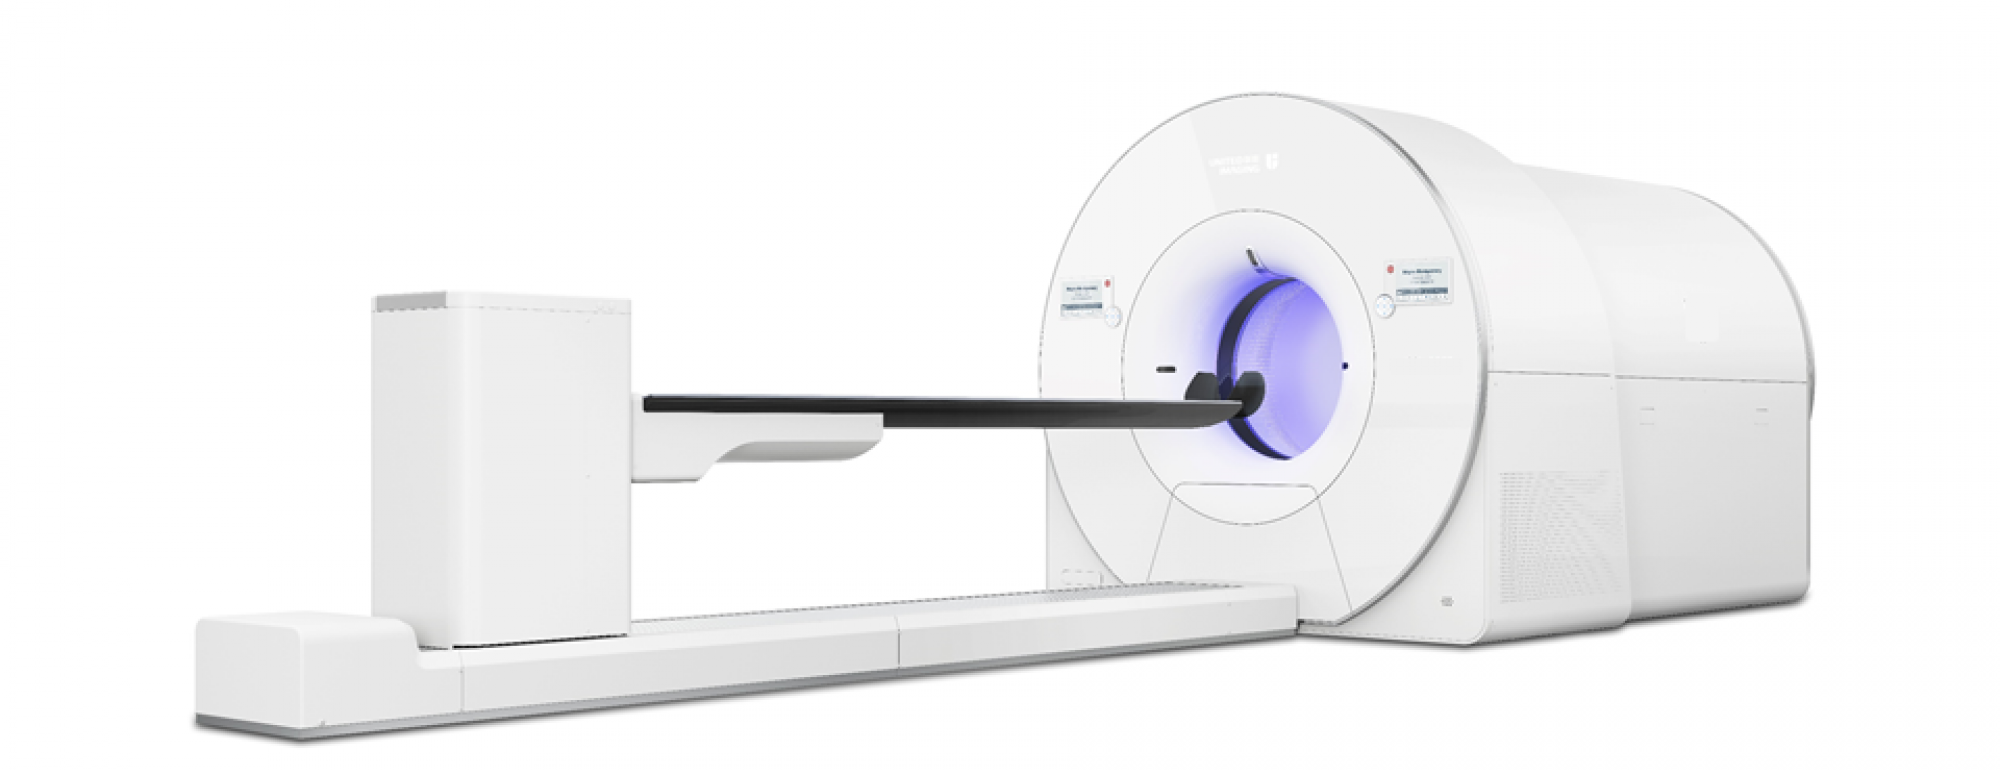 About EXPLORER total-body PET scanner